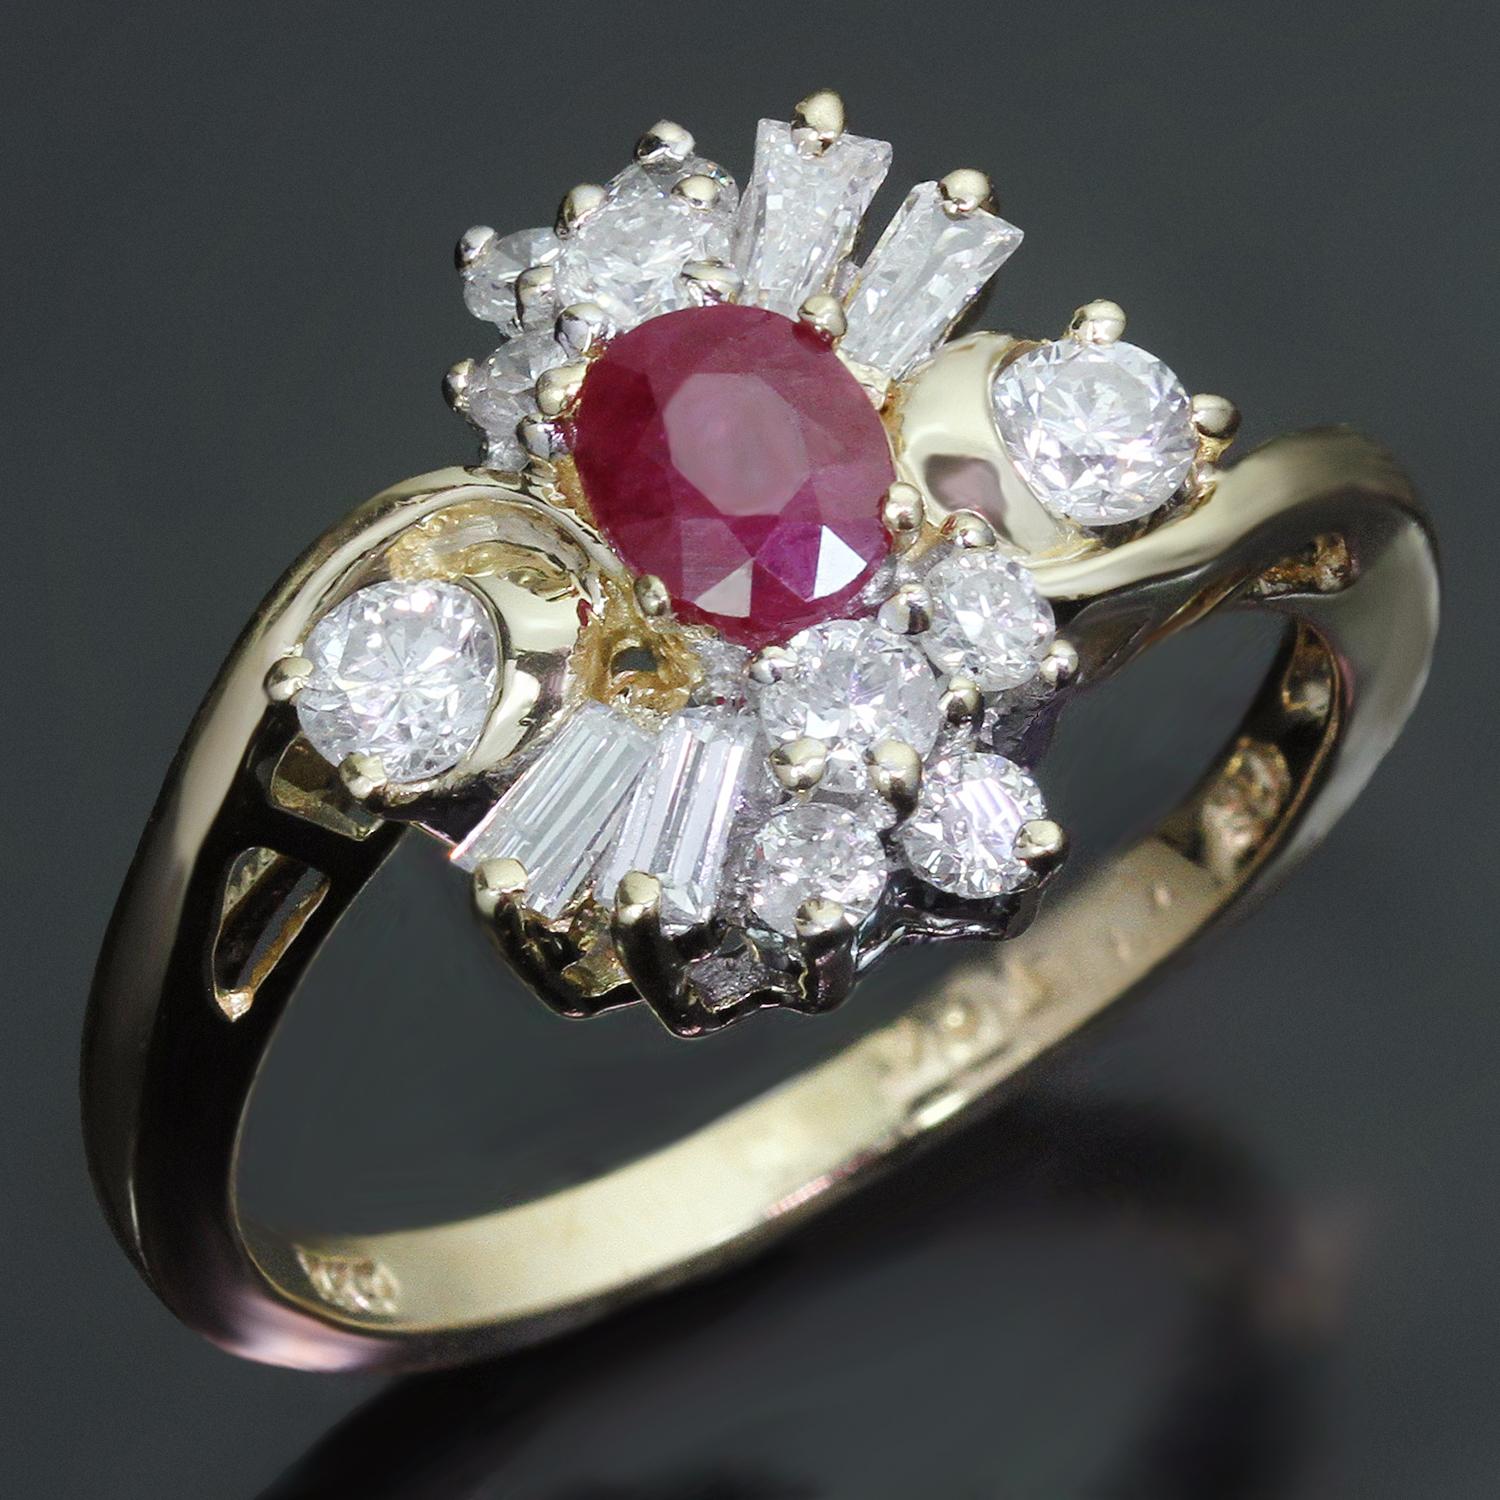 This gorgeous retro women's ring is crafted in 14k yellow gold and features an oval ruby weighing an estimated 0.40 carats, surrounded with round and baguette G-H VS2-SI1 diamonds weighing an estimated 0.79 carats. Made in United States circa 1980s